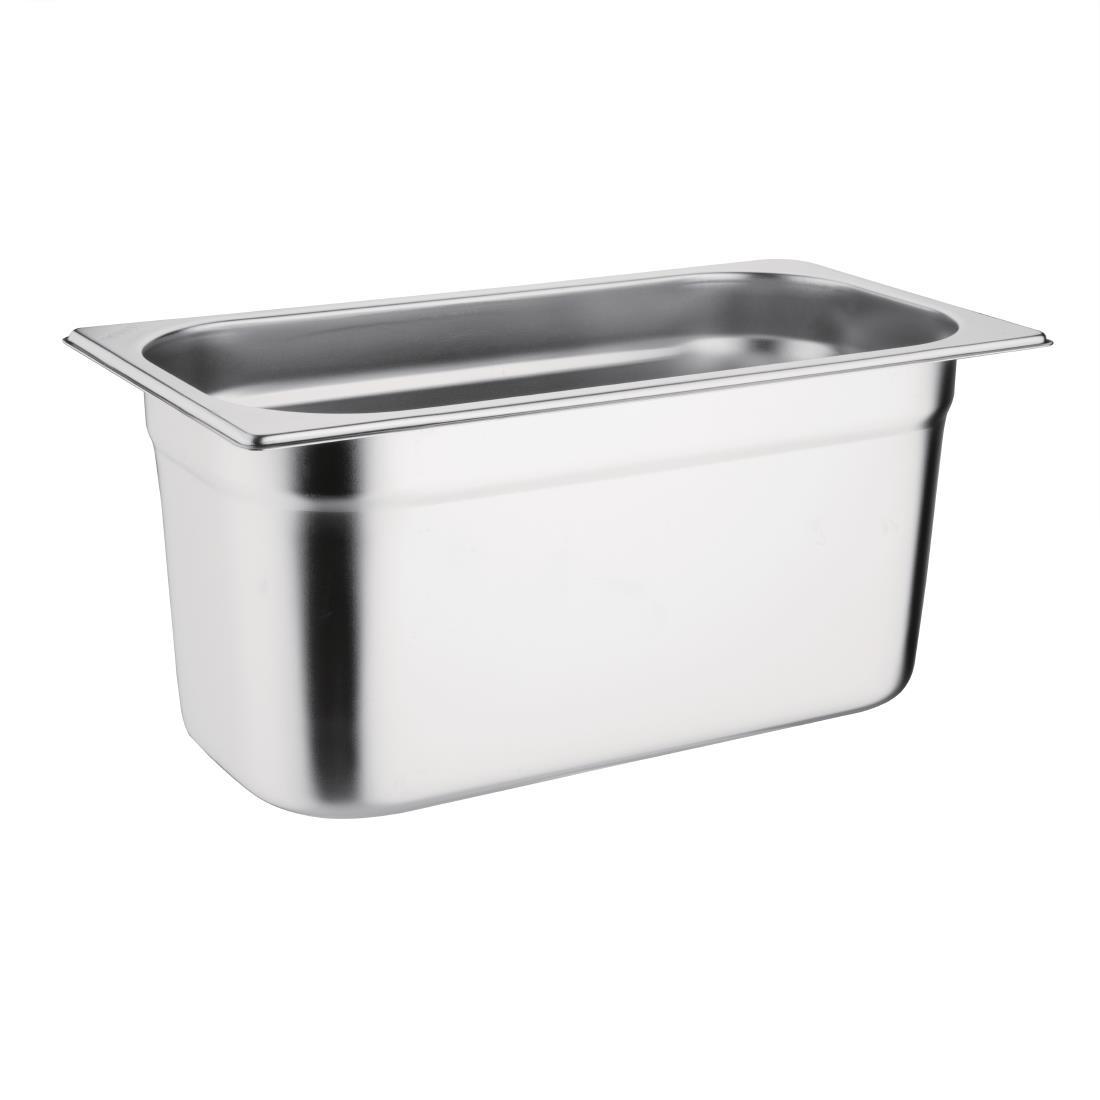 Vogue Stainless Steel 1/3 Gastronorm Pan 150mm - K934  - 1